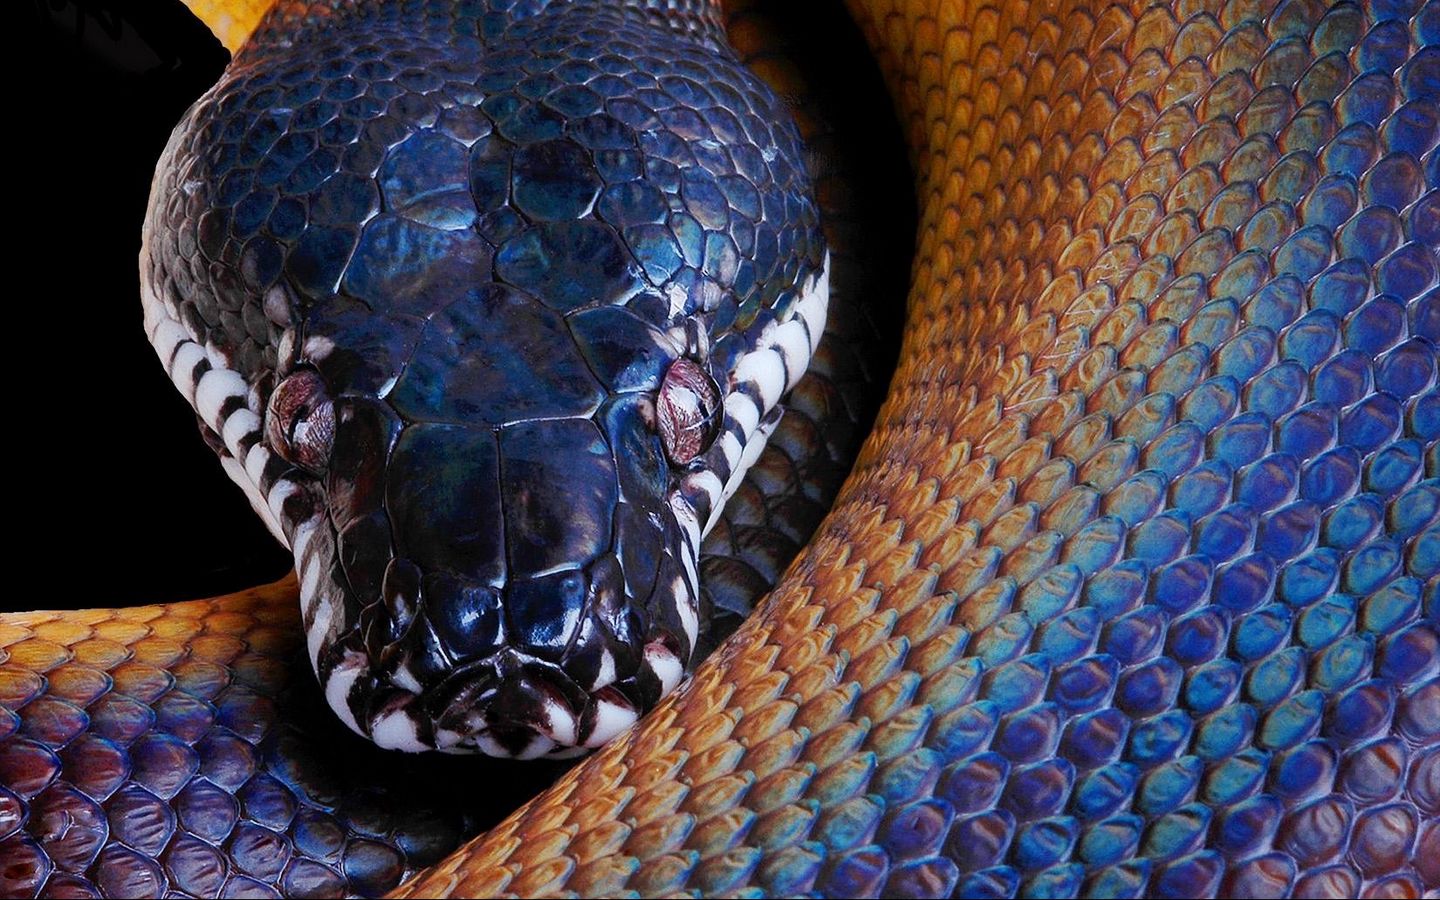 Download wallpaper 1440x900 snake, python, color, head widescreen 16:10 hd  background